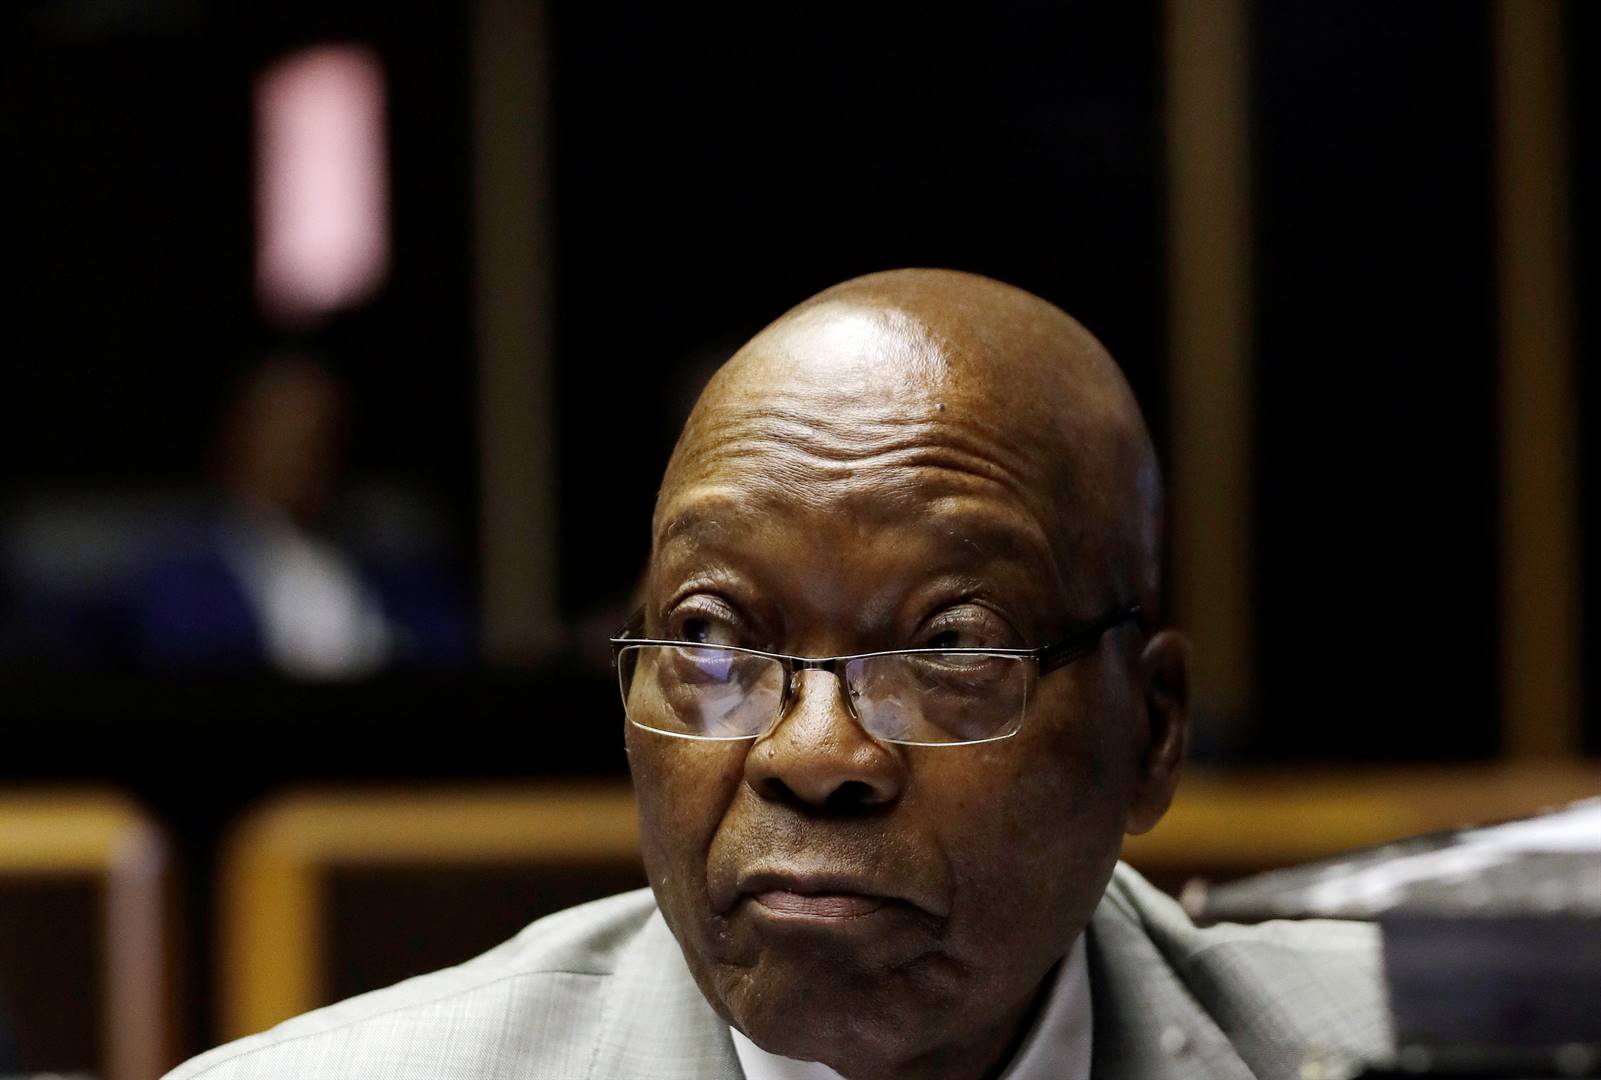 Jacob Zuma sits in court where he faces charges that include fraud, corruption and racketeering. Picture: Themba Hadebe/Reuters